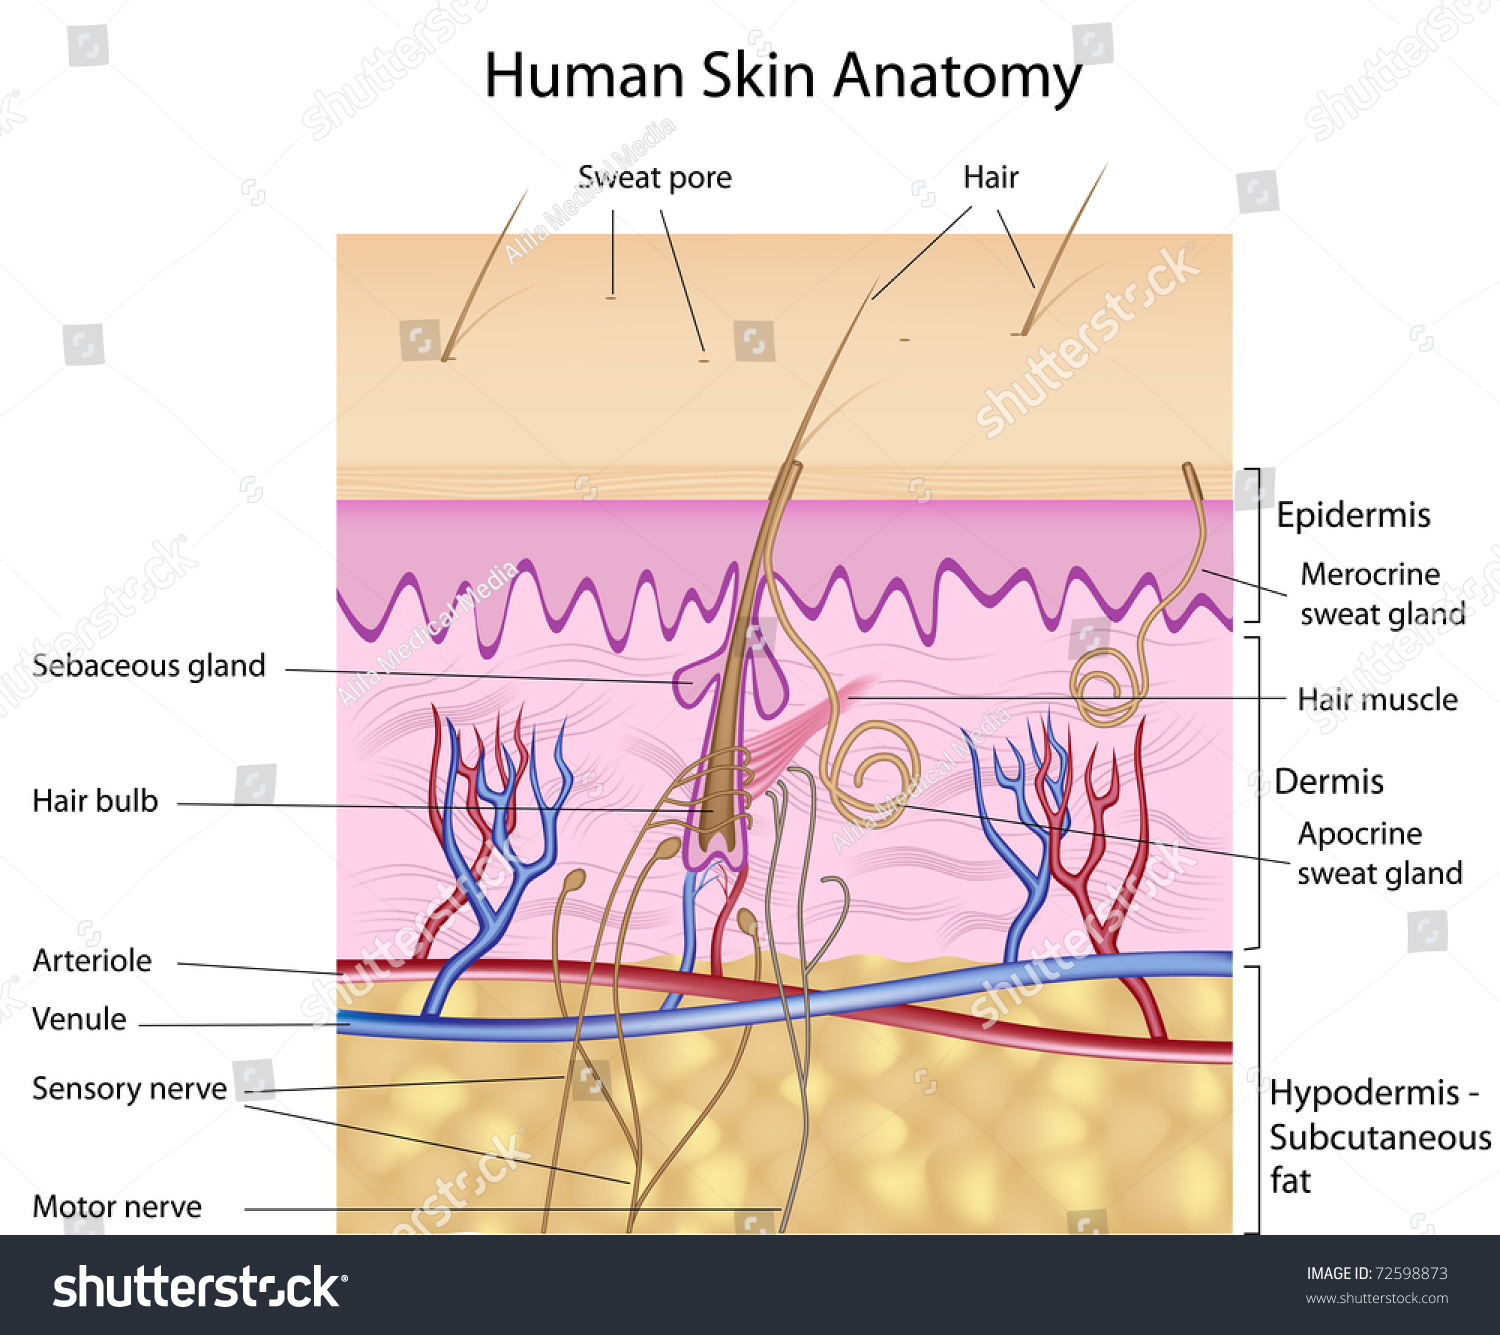 Labelled Pictures Of Human Skin / Skin Diagram And Information About